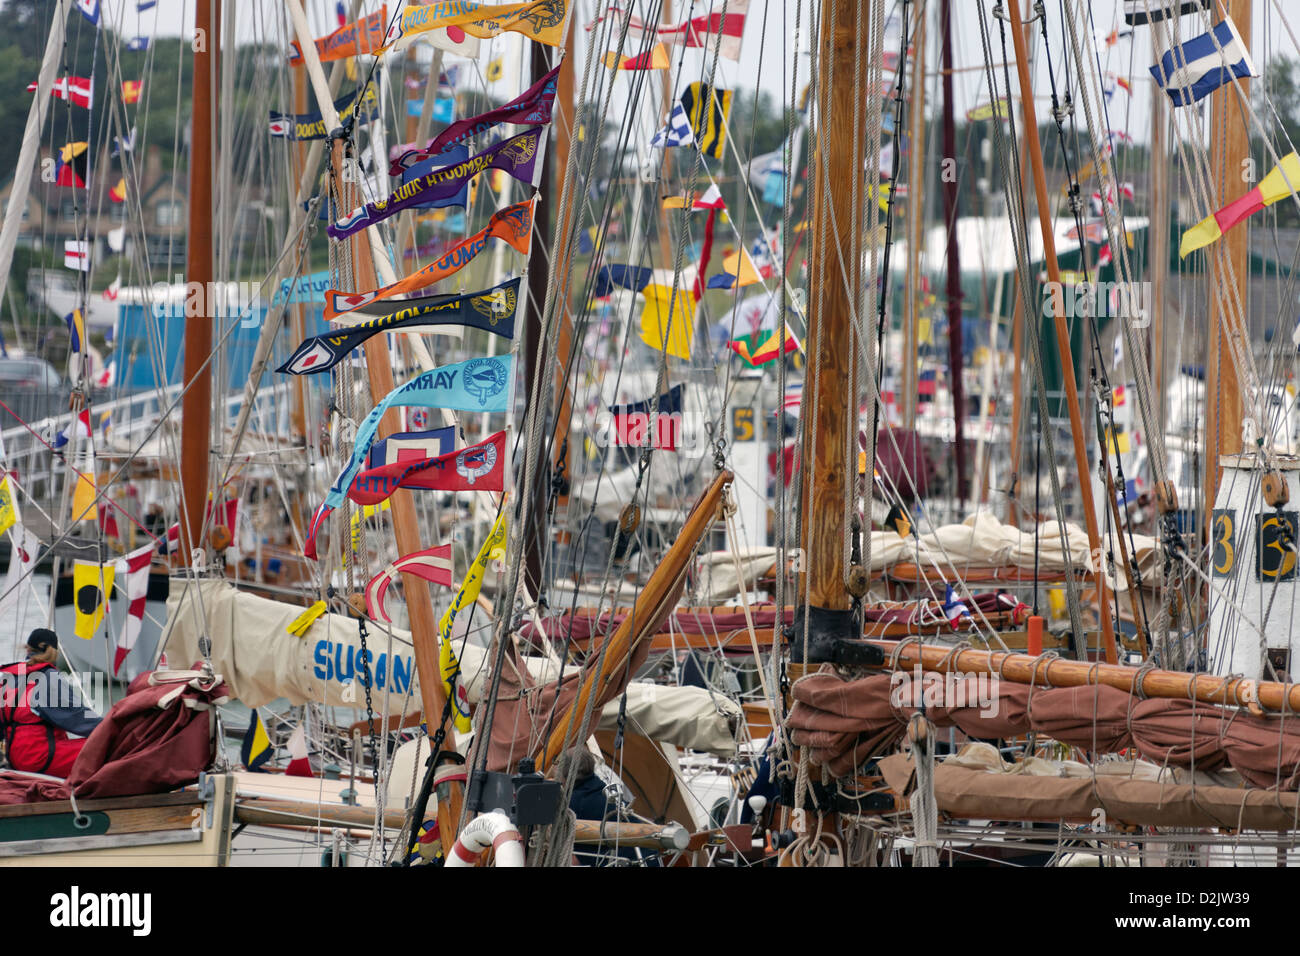 Old Gaffers festival in Yarmouth, Isle of Wight, England Stock Photo